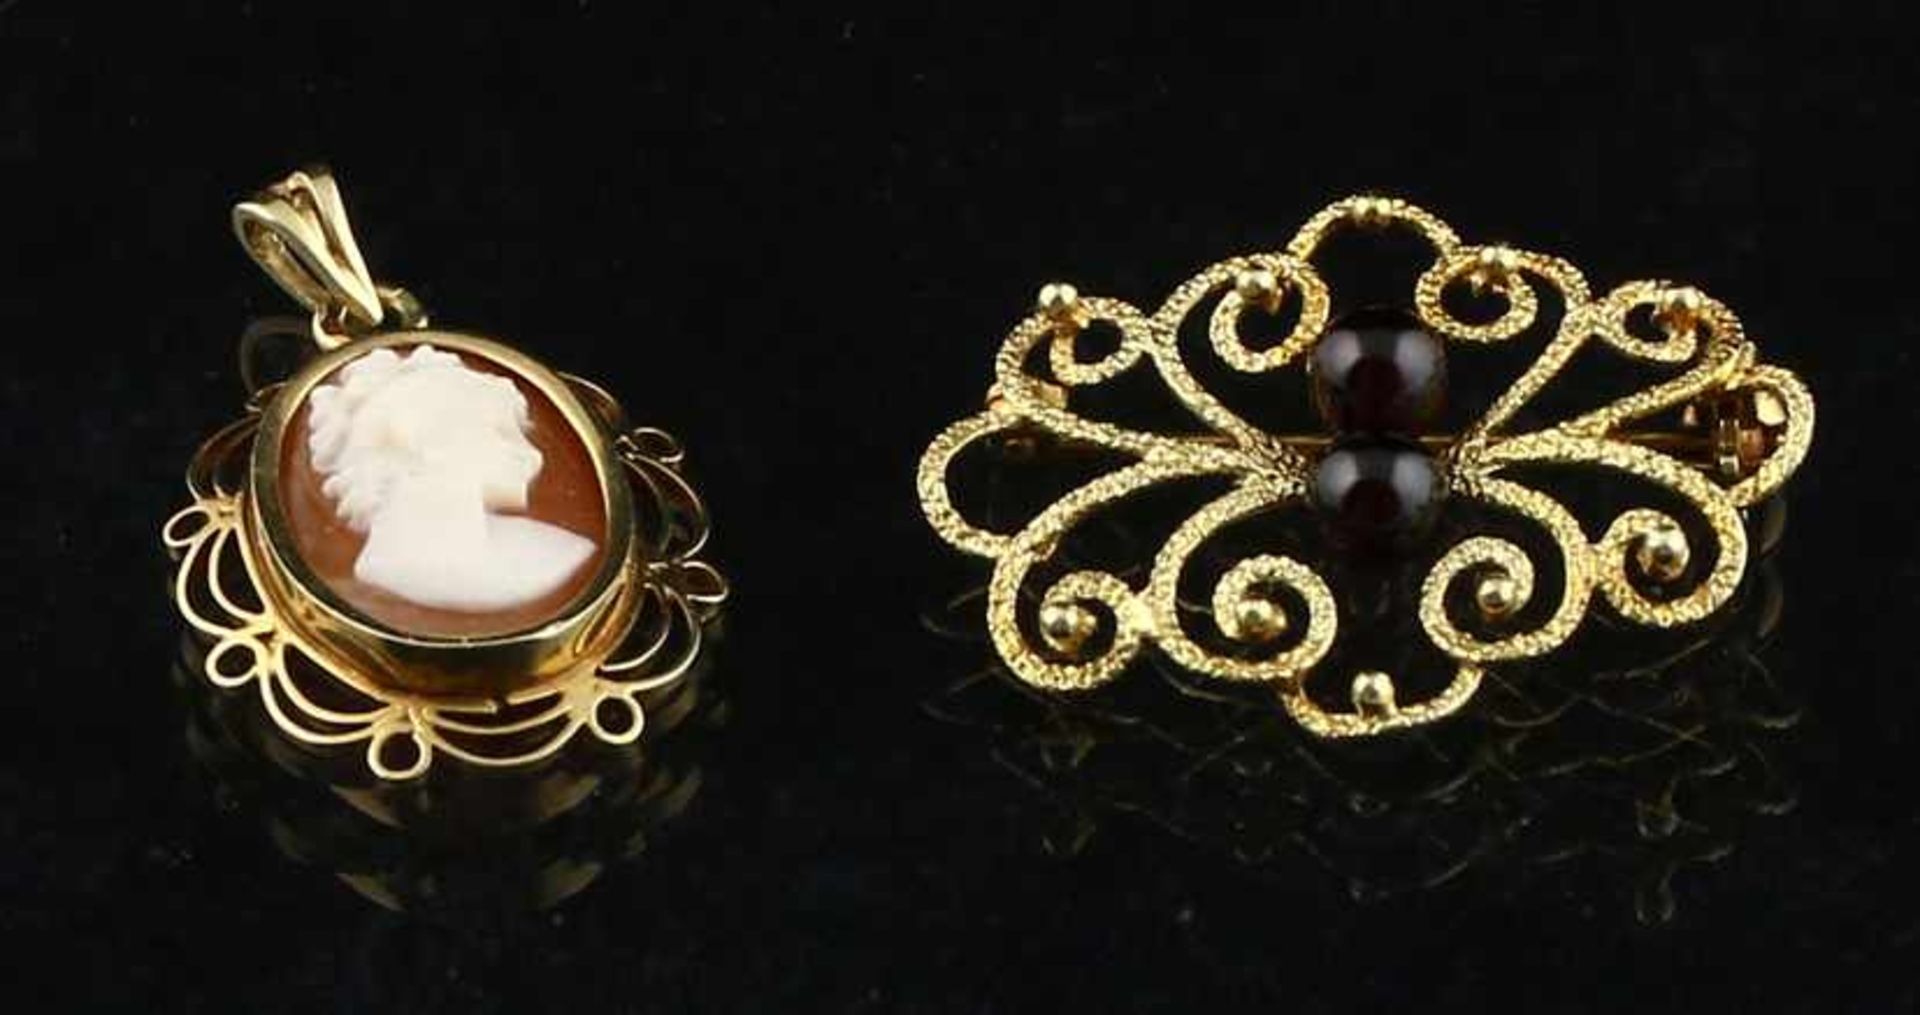 14k yellow gold open-worked brooch, set with two garnet beads - 22 x 30 mm - and a pendant set